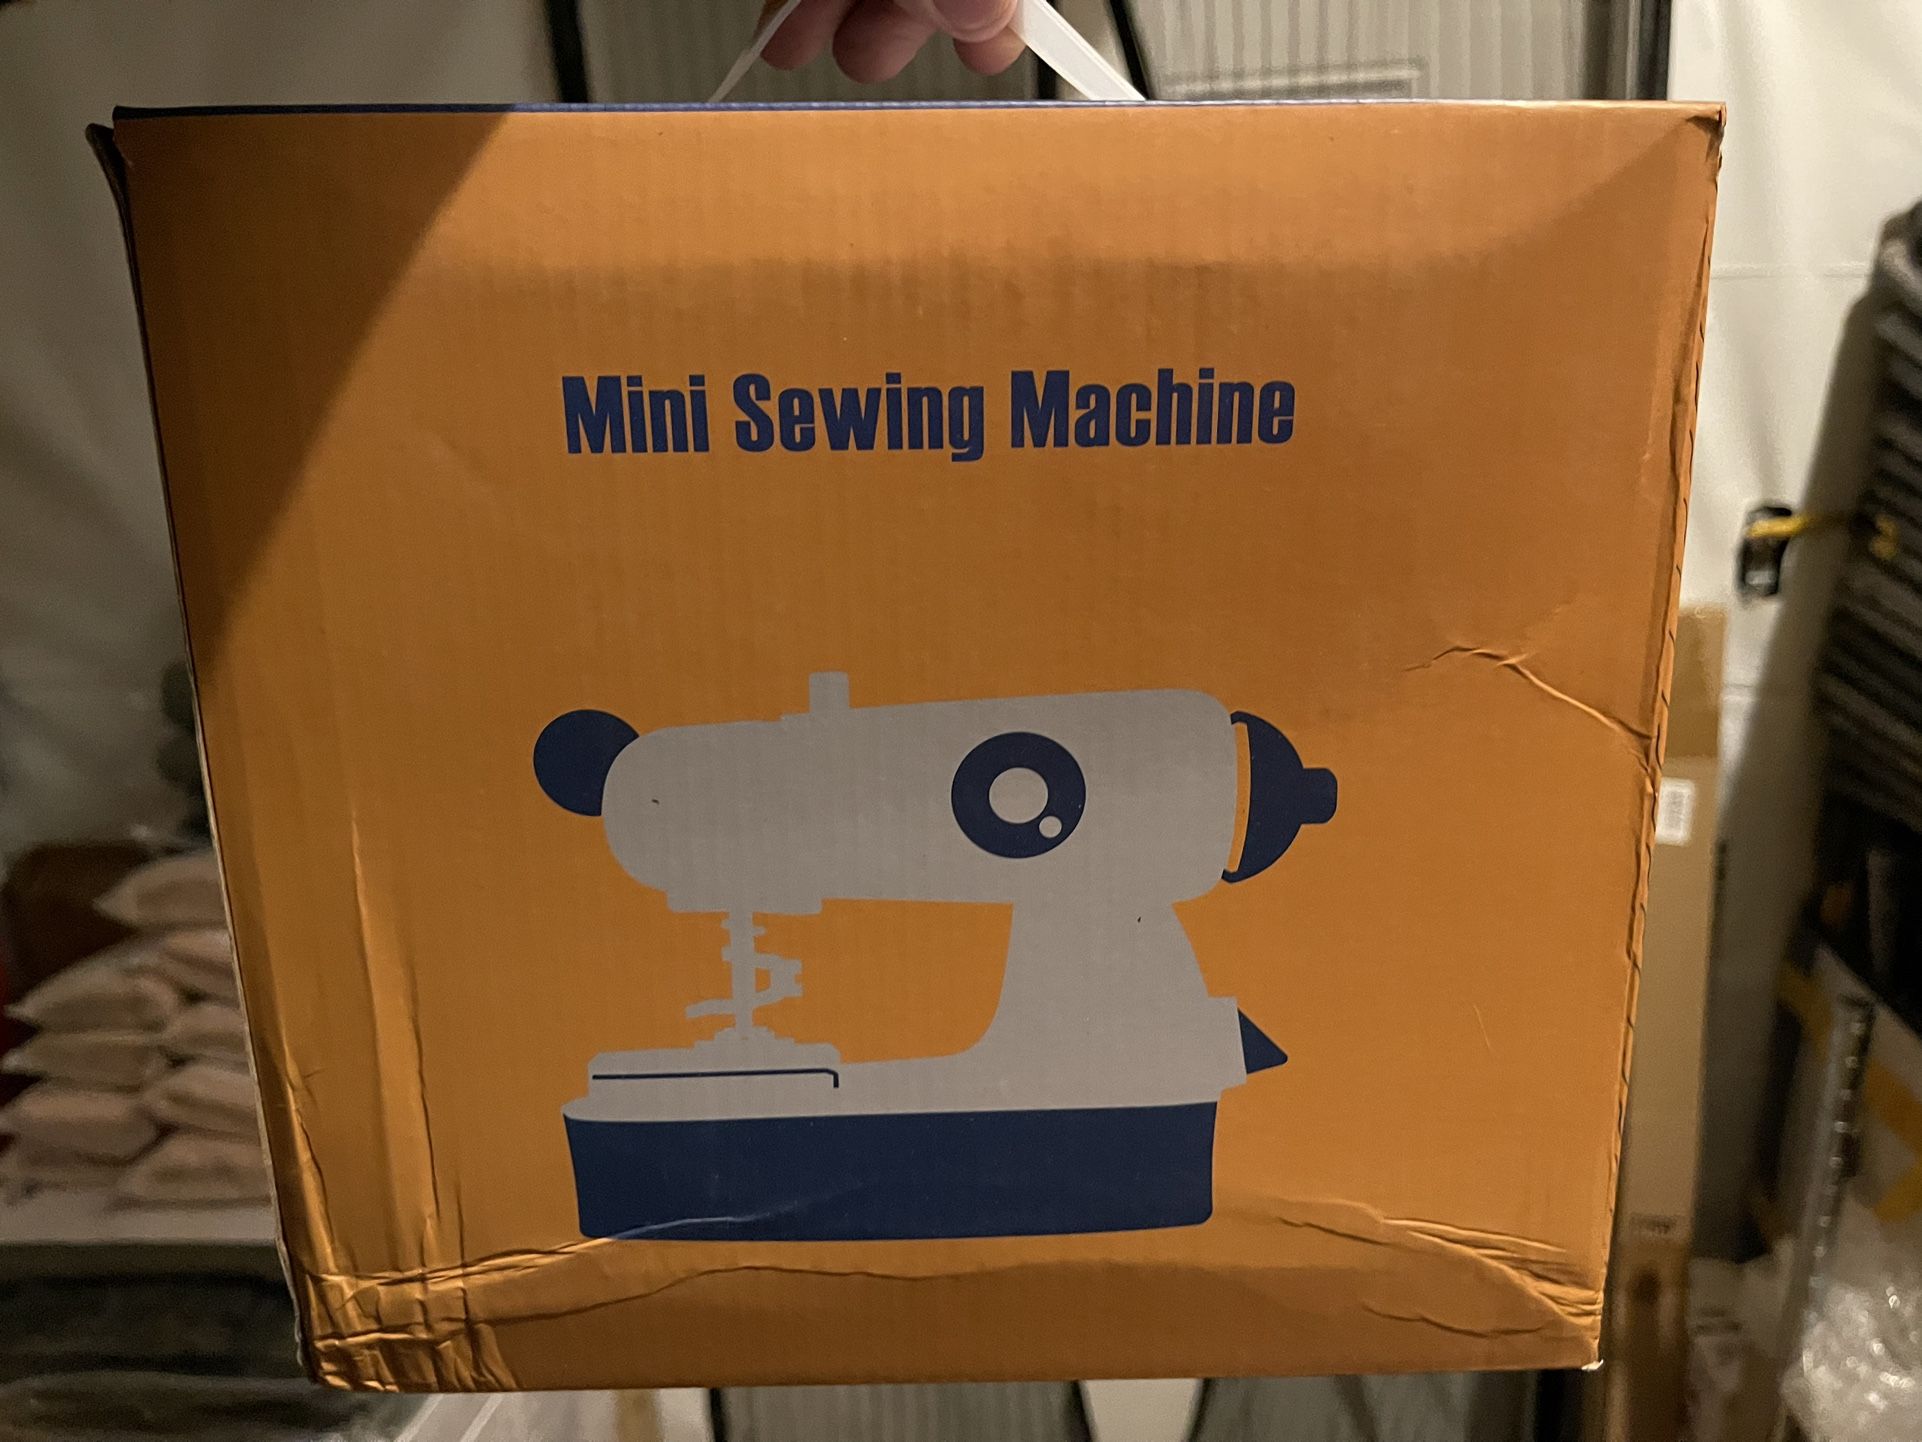 Small Portable Sewing Machine for Kids